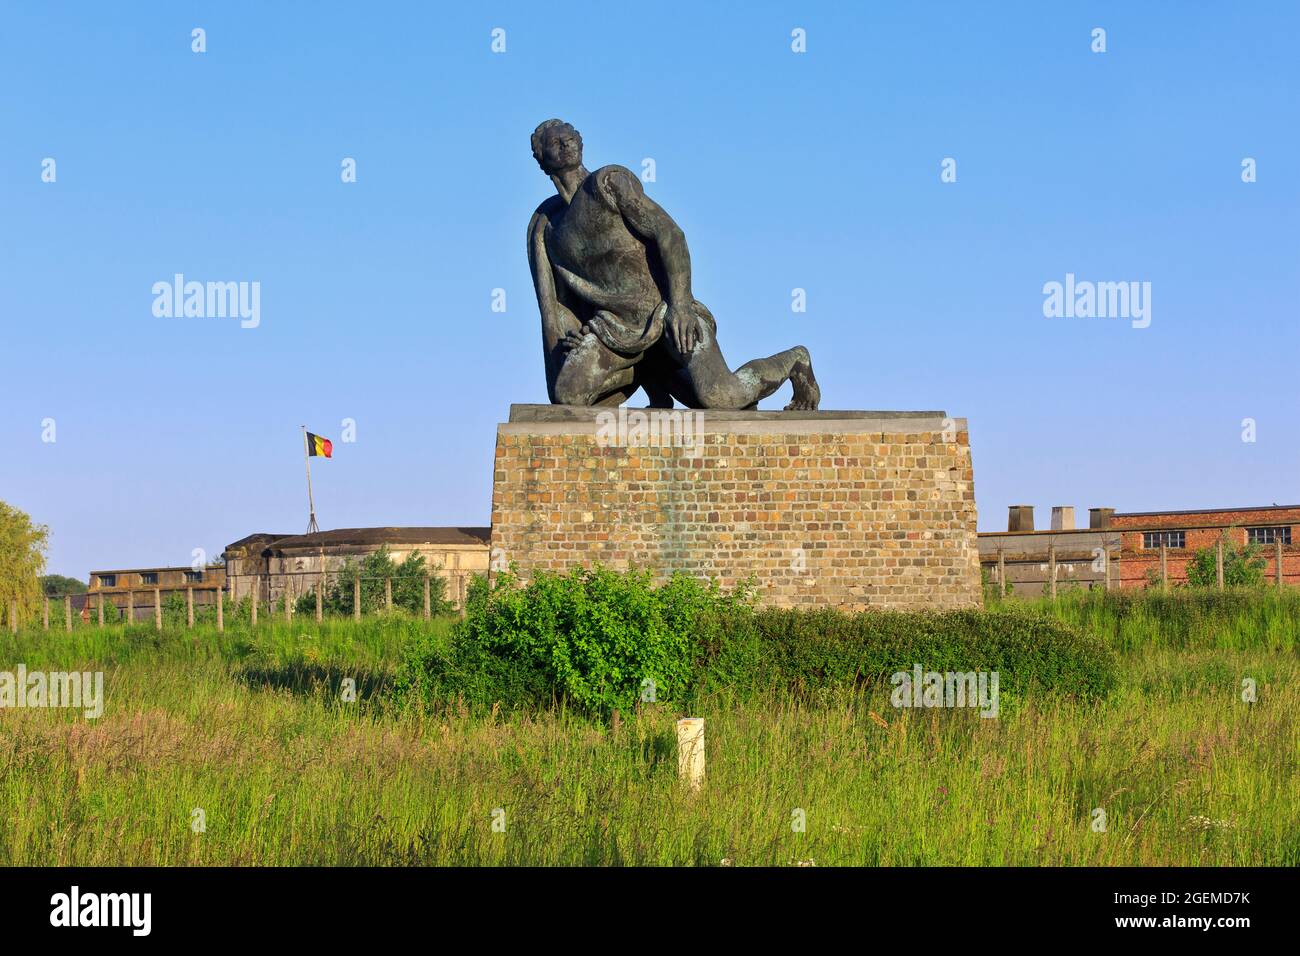 The Political Prisoner (1947) by Idel Ianchelevici at Fort Breendonk (a World War II Nazi prison camp) in Breendonk (province of Antwerp), Belgium Stock Photo